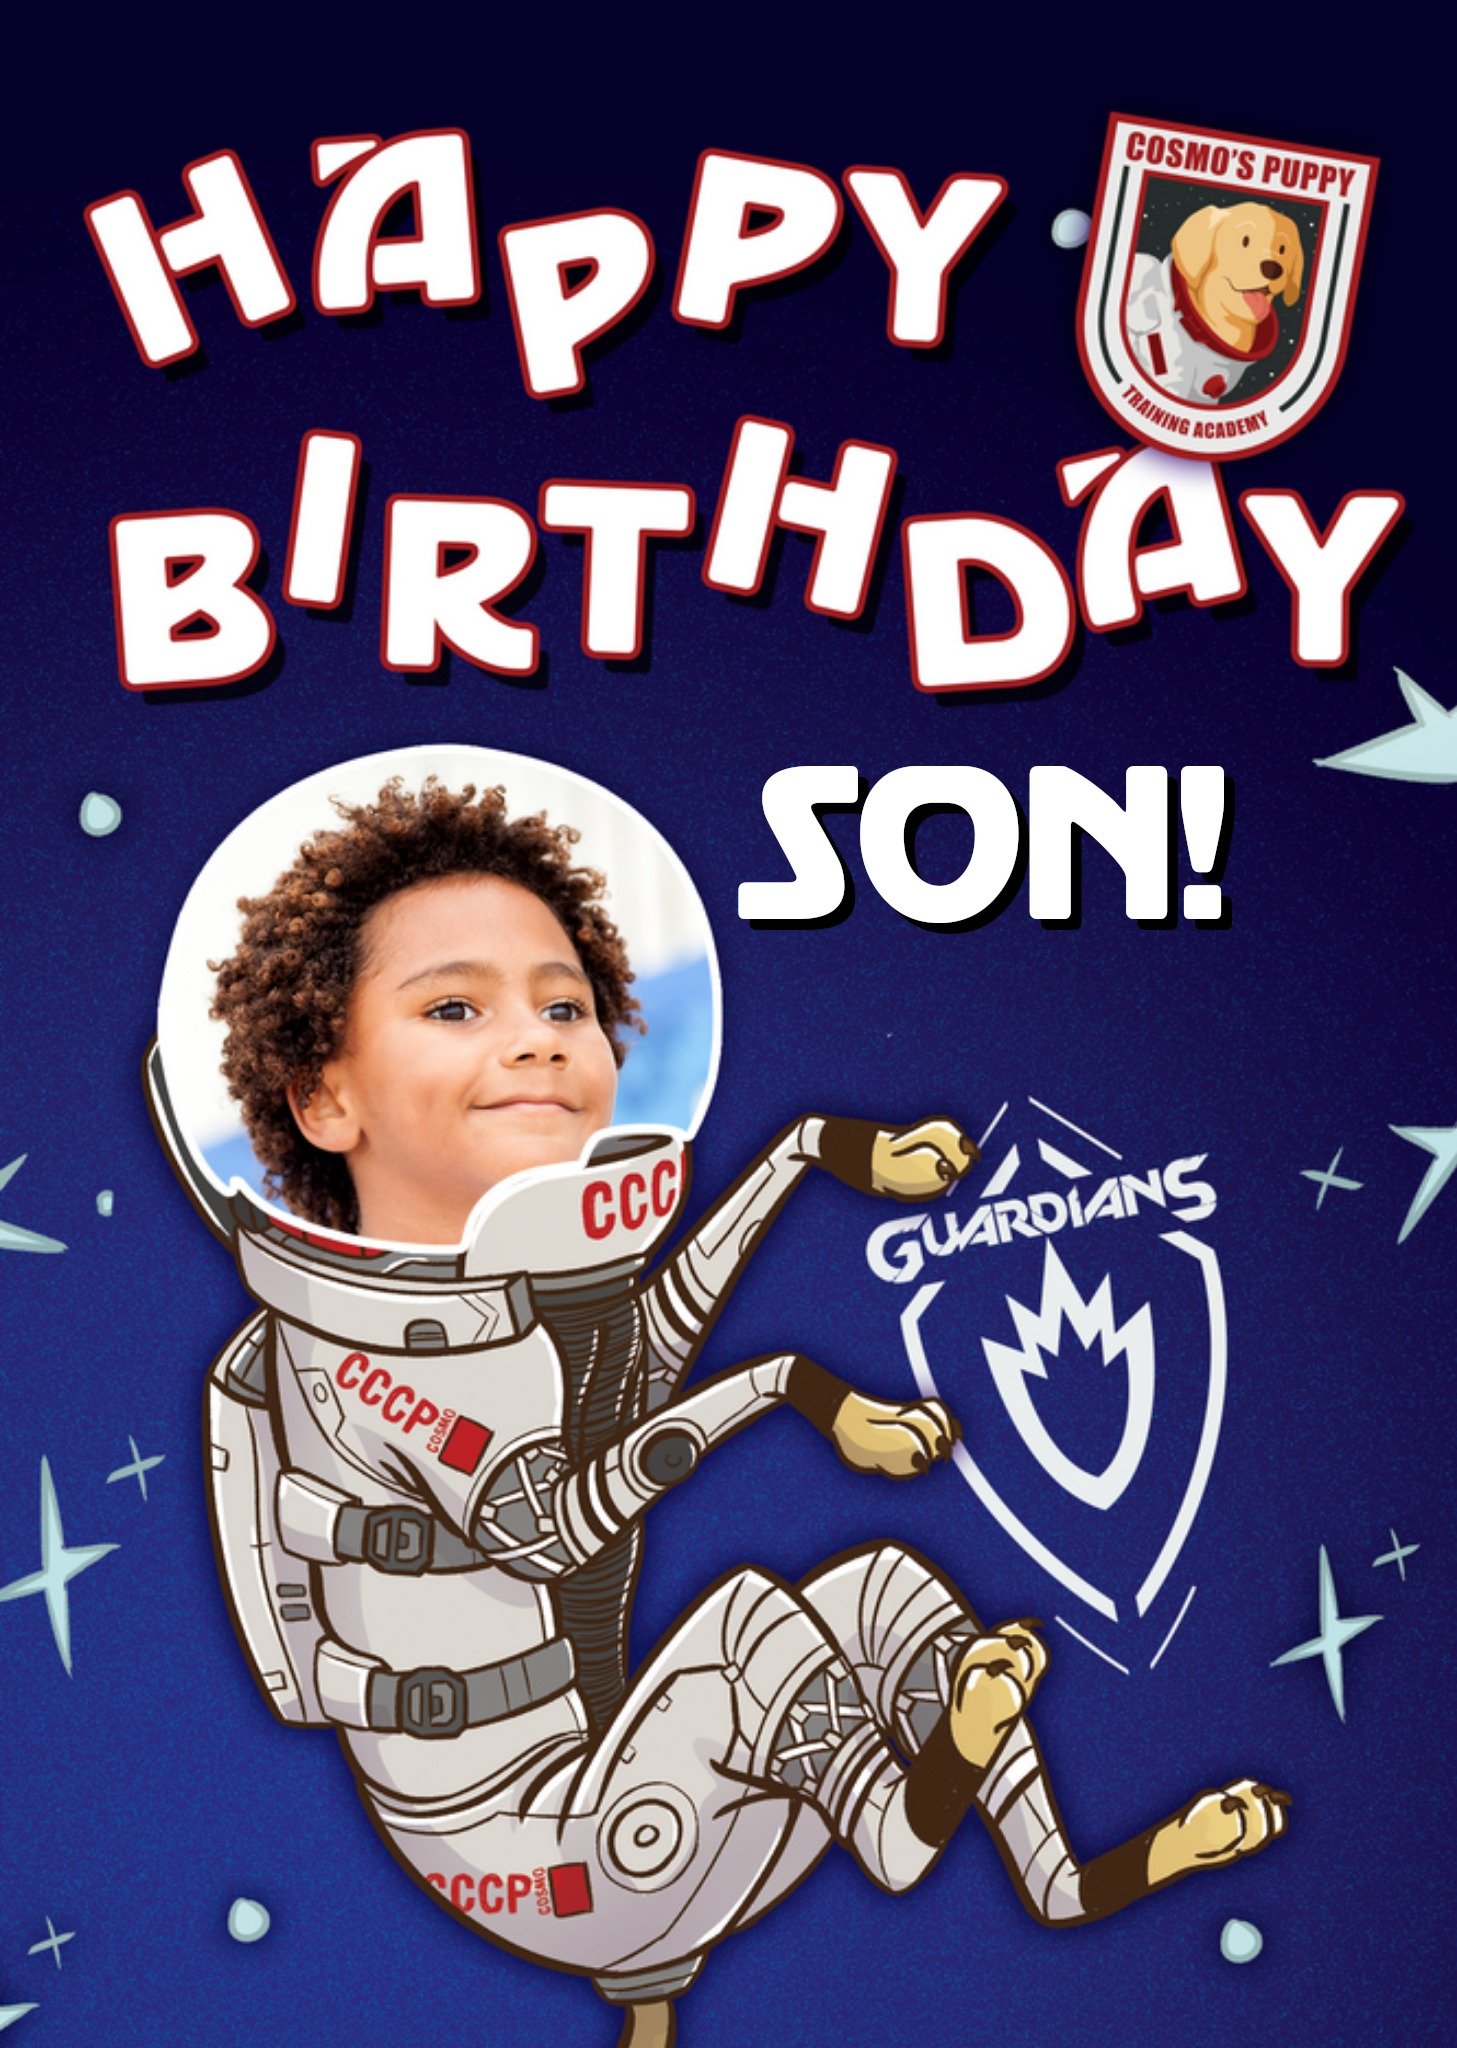 Marvel Guardians Of The Galaxy Cosmo Son Photo Upload Birthday Card, Large